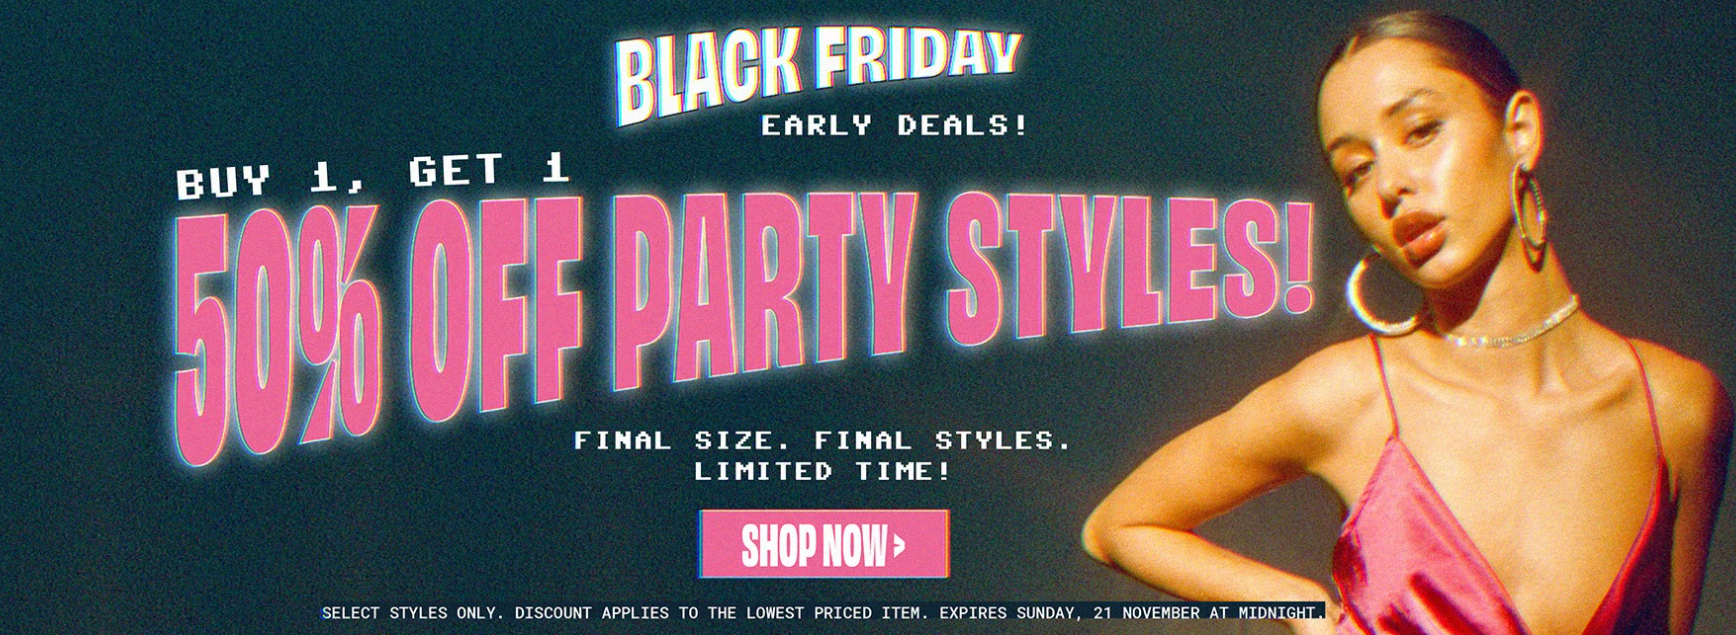 Buy 1 get 1 extra 50% OFF on party styles including clothing & accessories with promo code